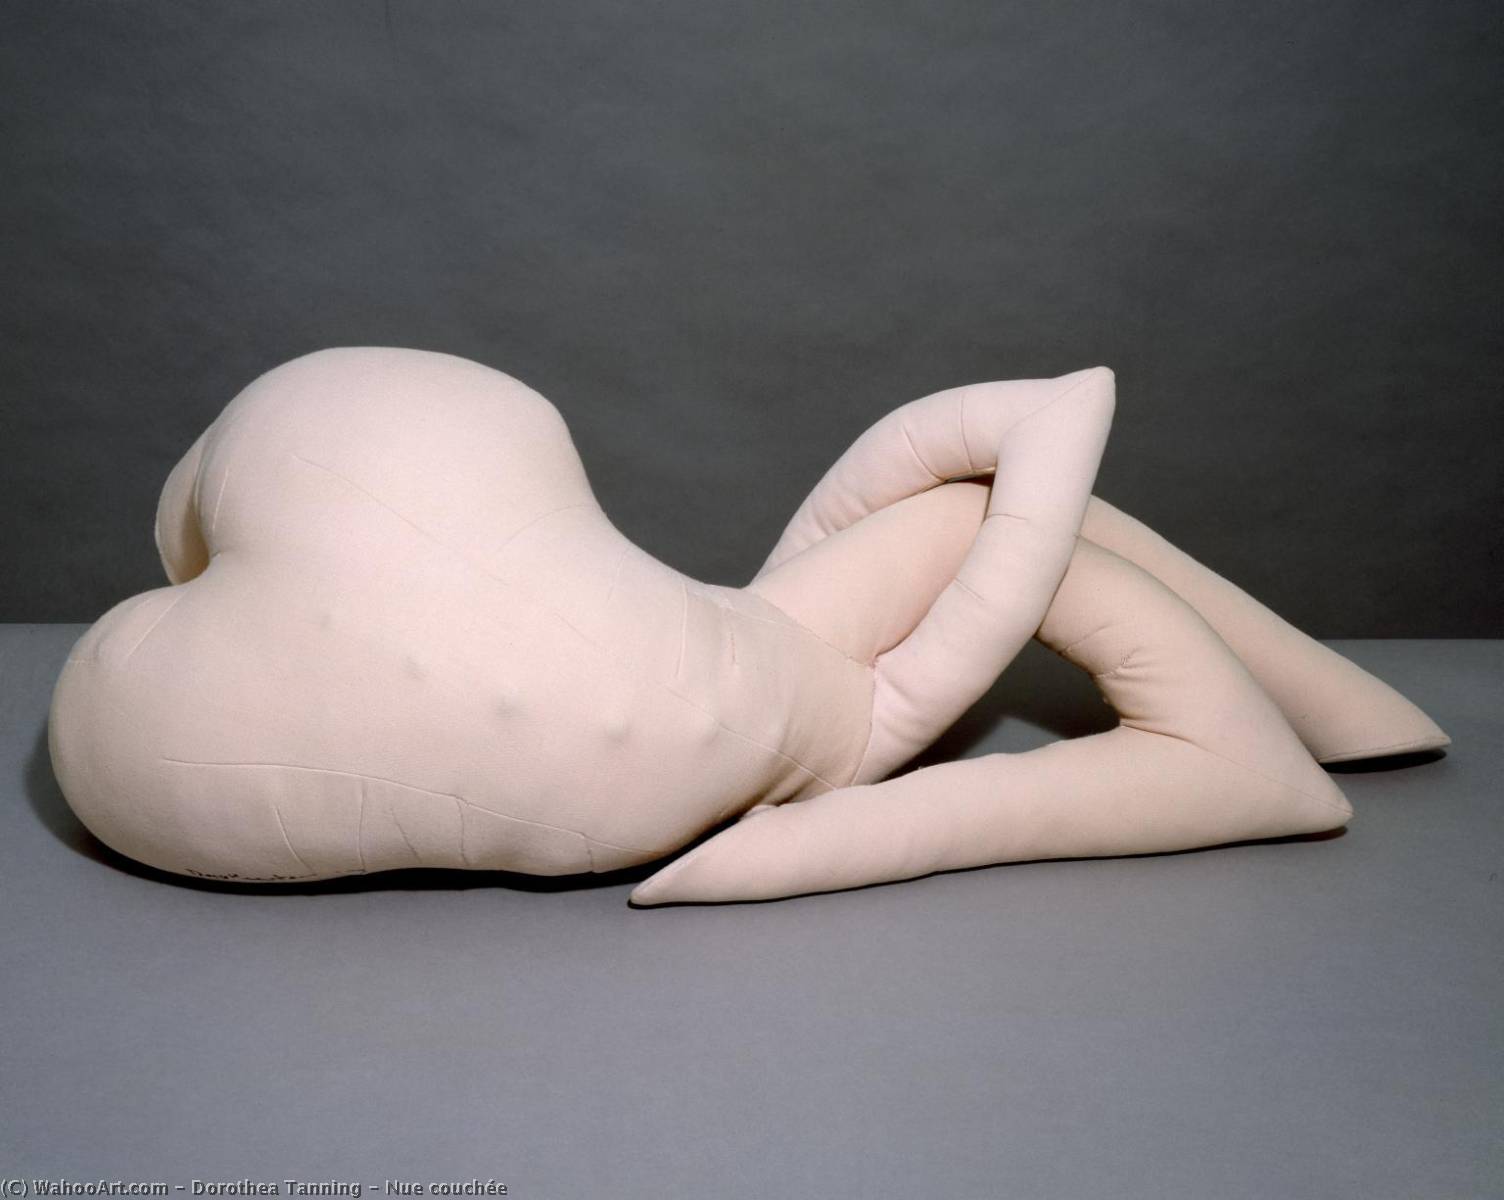 WikiOO.org - Encyclopedia of Fine Arts - Lukisan, Artwork Dorothea Tanning - Nue couchée